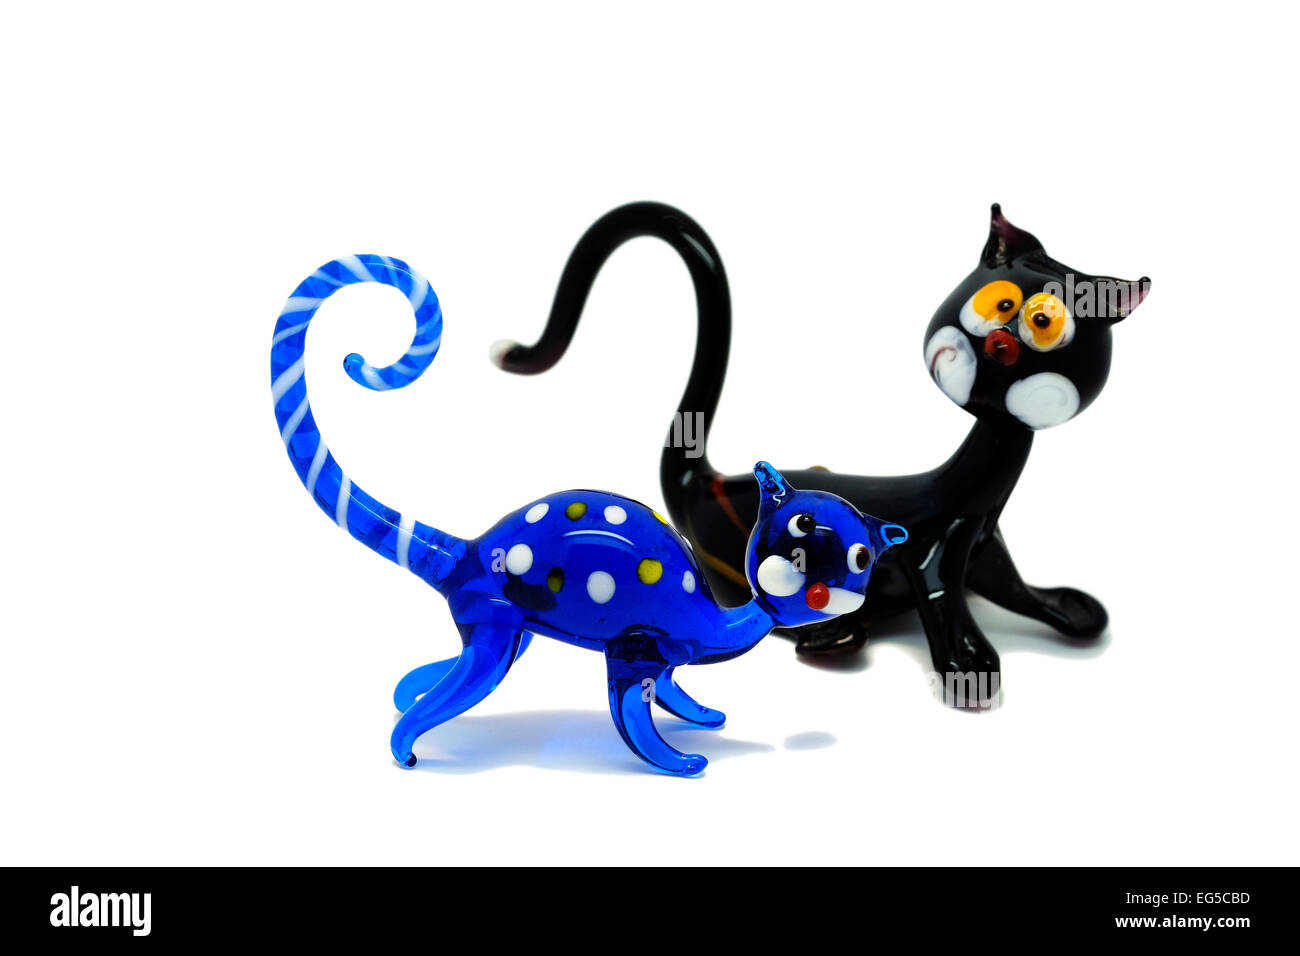 Two Murano Glass cat figurines blue and black as a cut-out Stock Photo